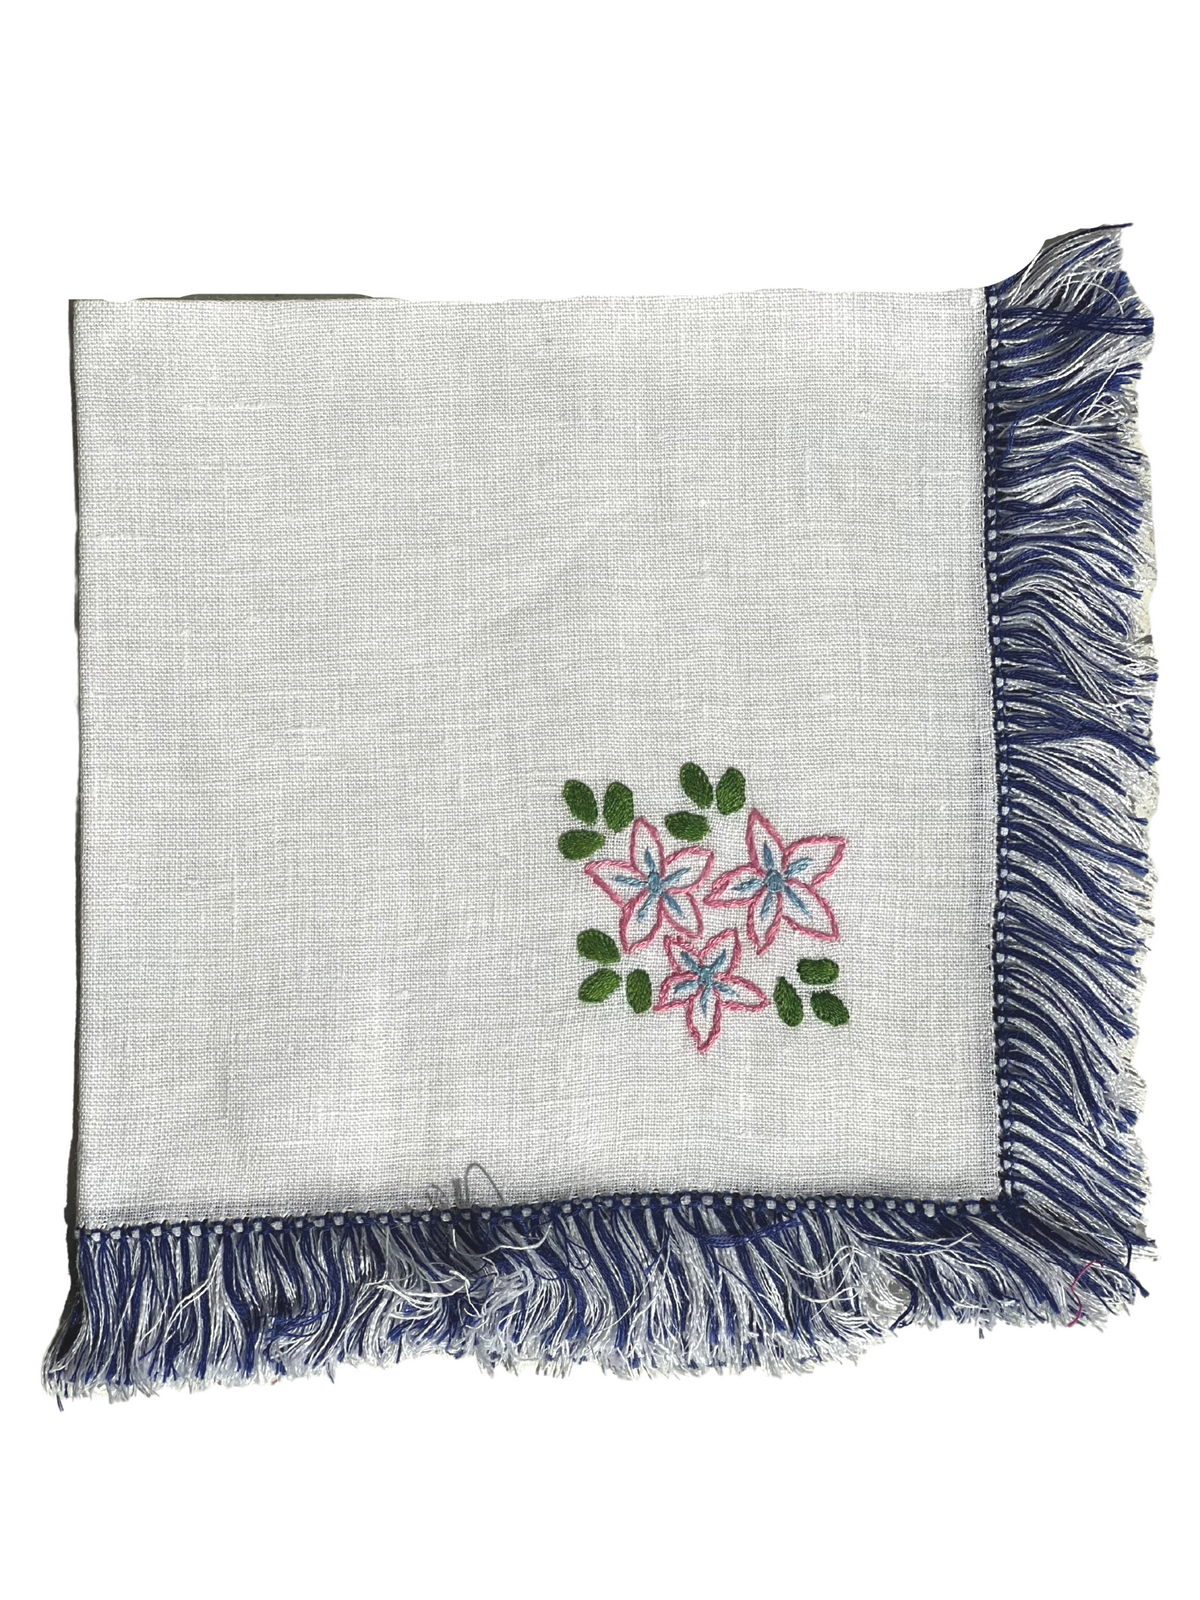 Fringe Dinner Napkin with Hand Stitched Noche Buena -  Holiday Collection